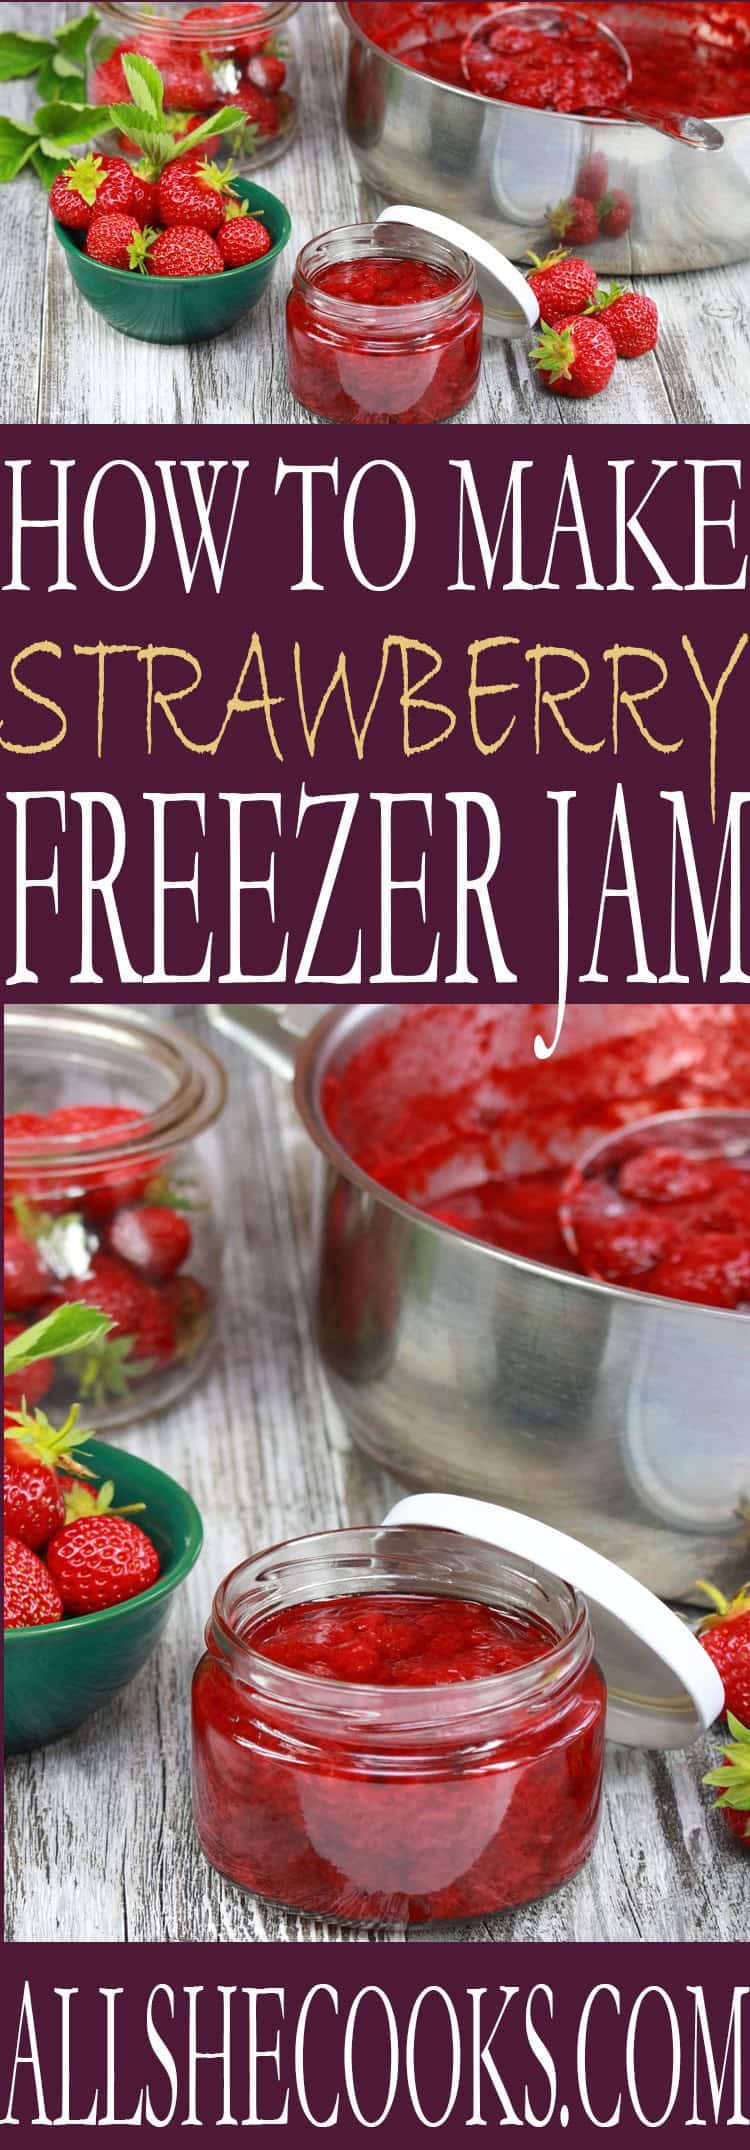 Learn how to make freezer strawberry jam at home. This is an easy recipe flavorful sweet strawberry jam recipe.